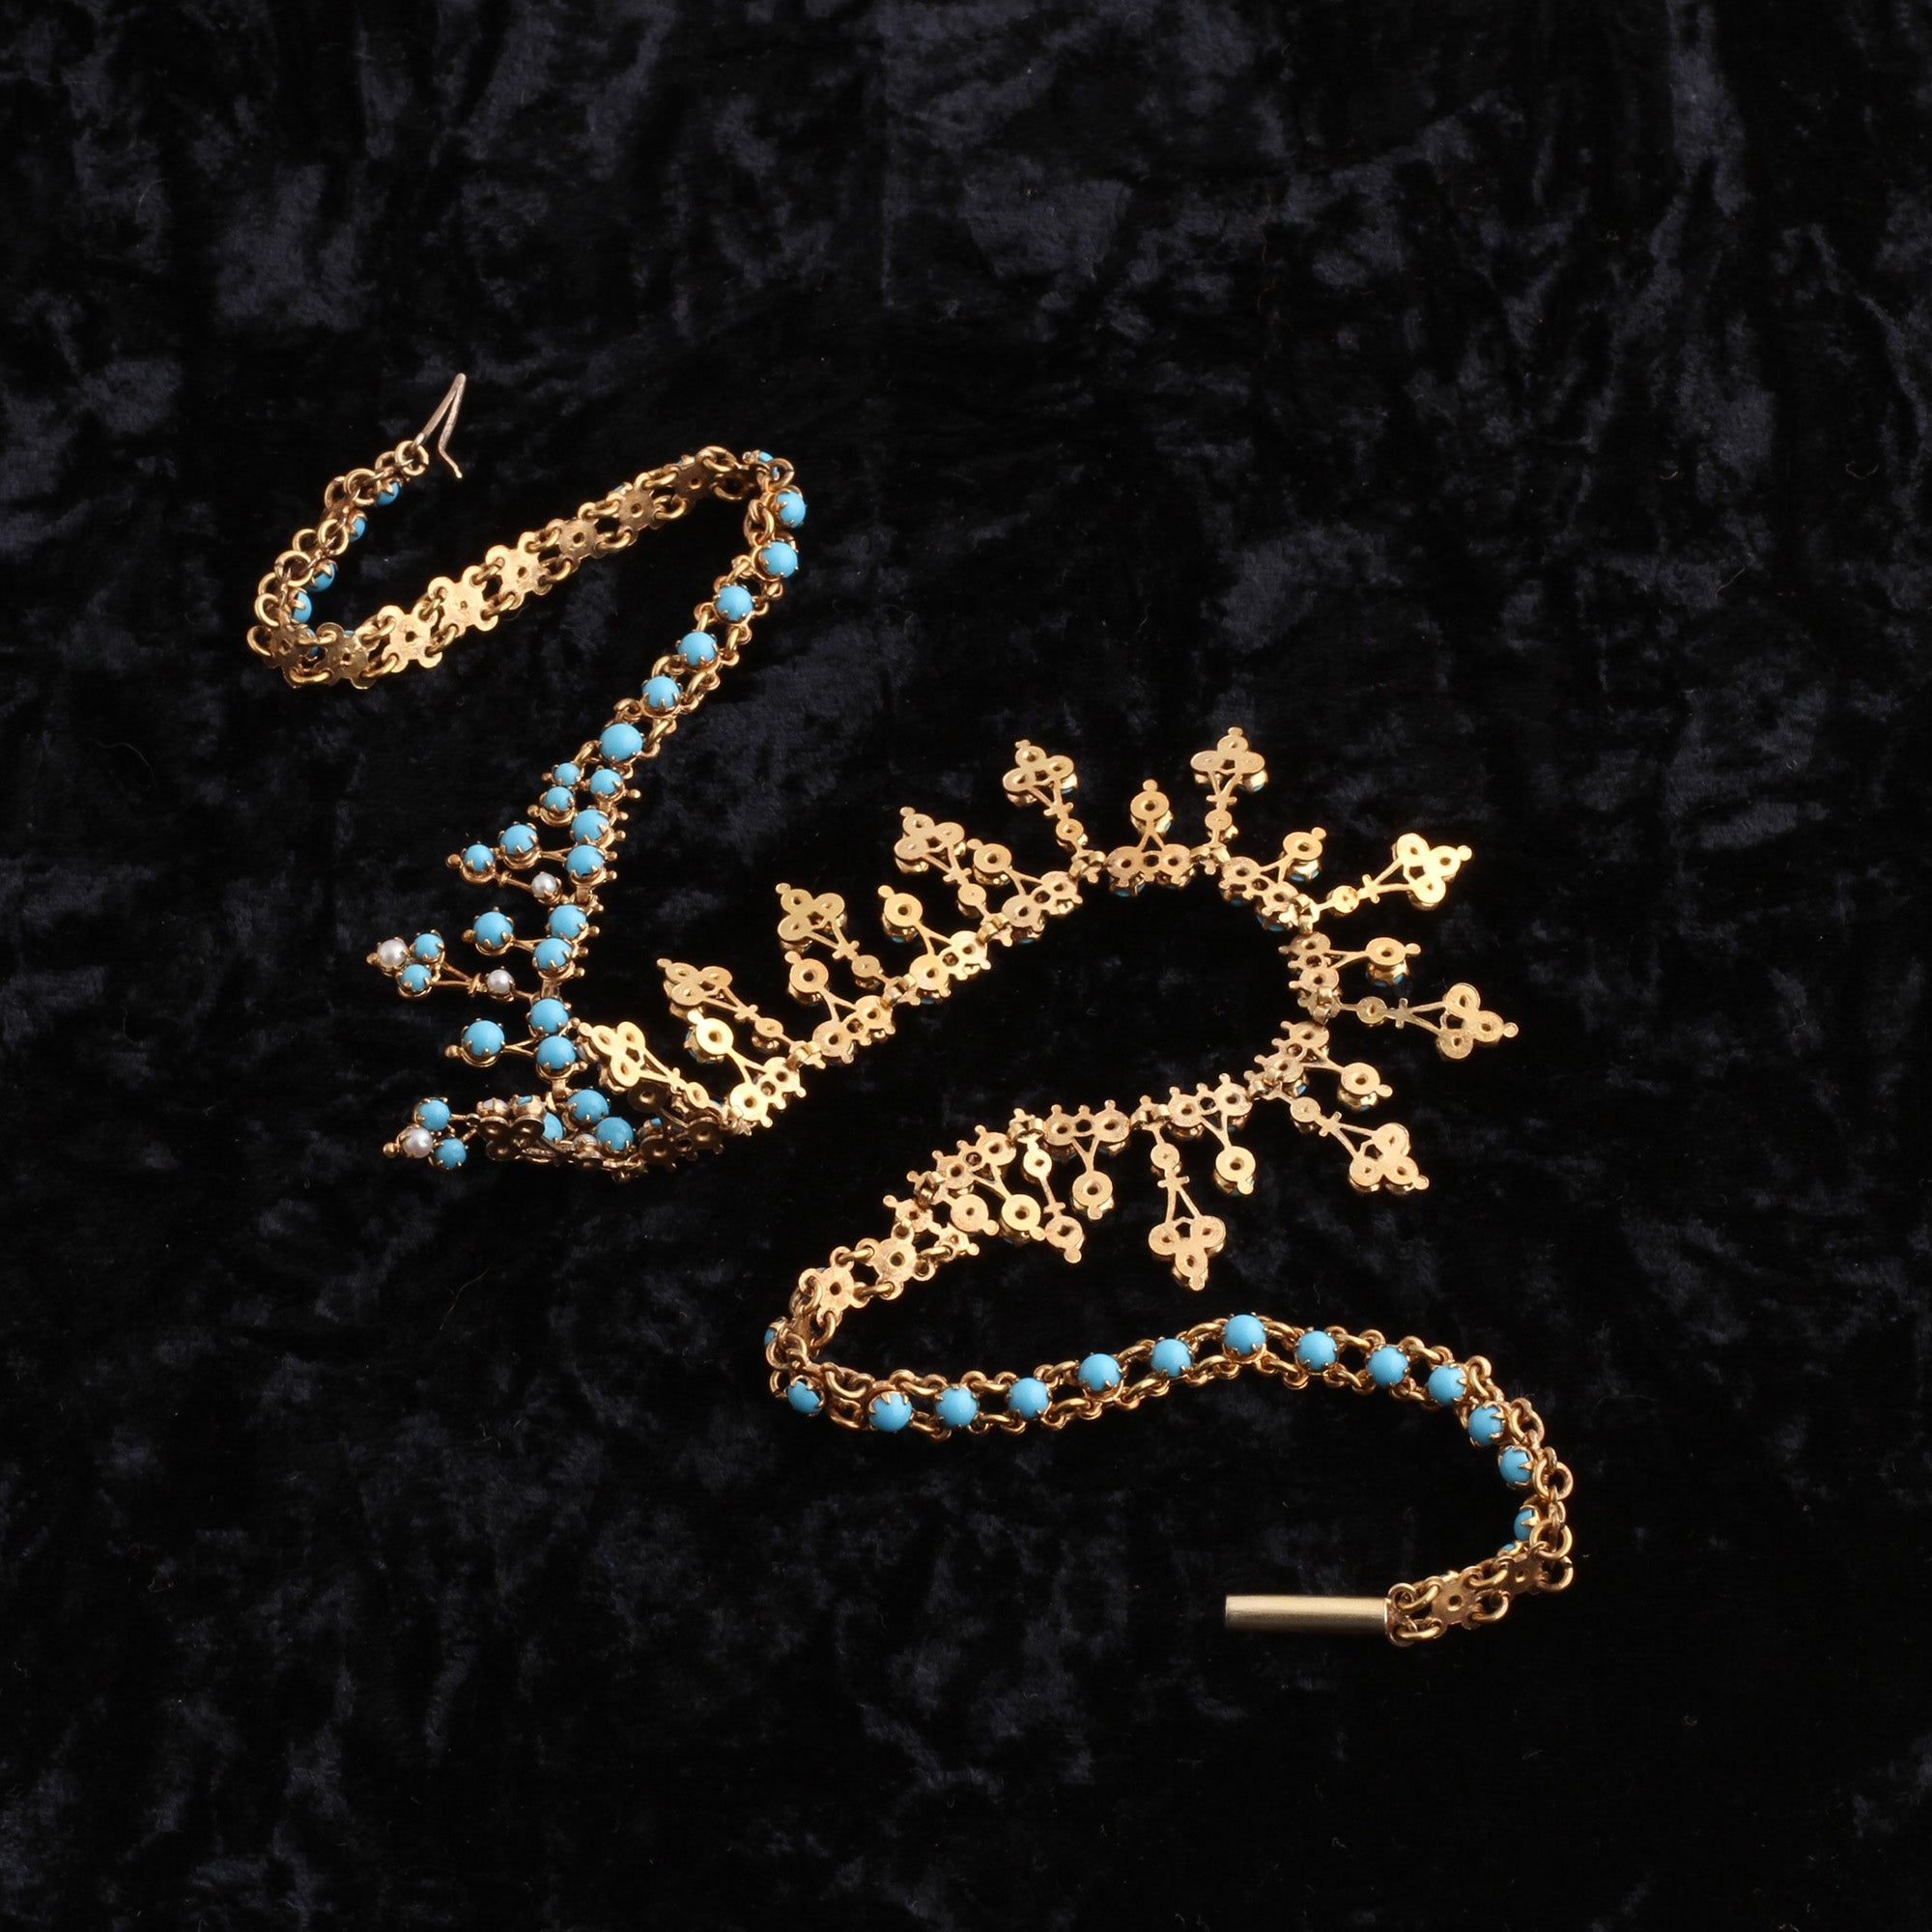 Victorian Turquoise Paste & Faux Pearl Fringe Necklace